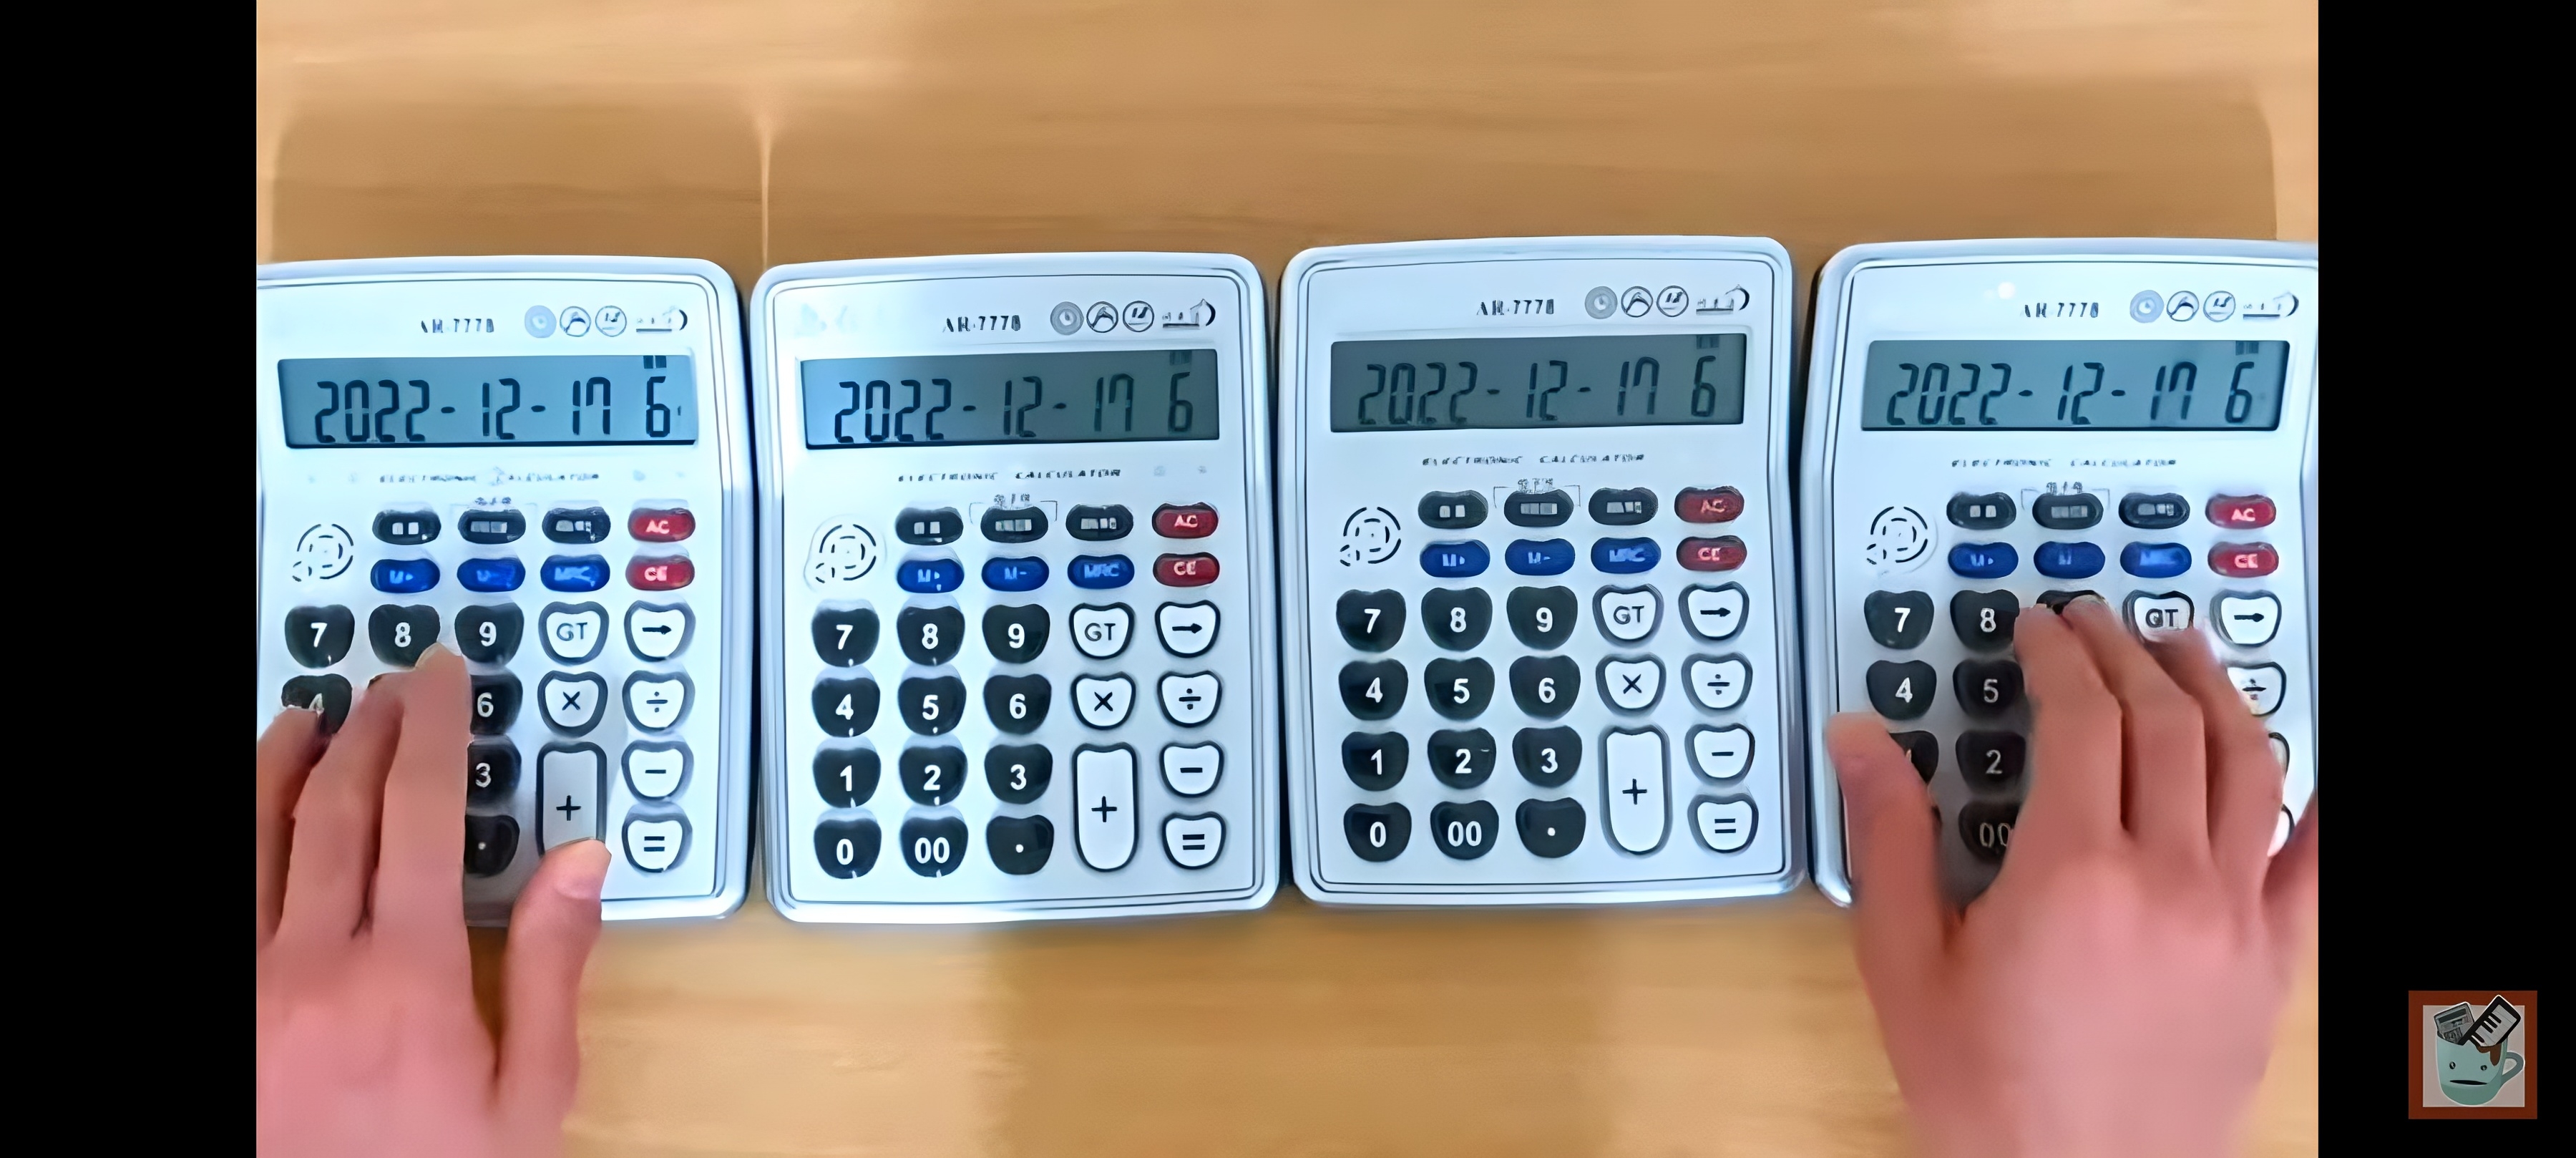 Keyboard, guitar, drums? What a bunch of ordinary instruments. But have you ever heard someone make a calculator as an instrument?